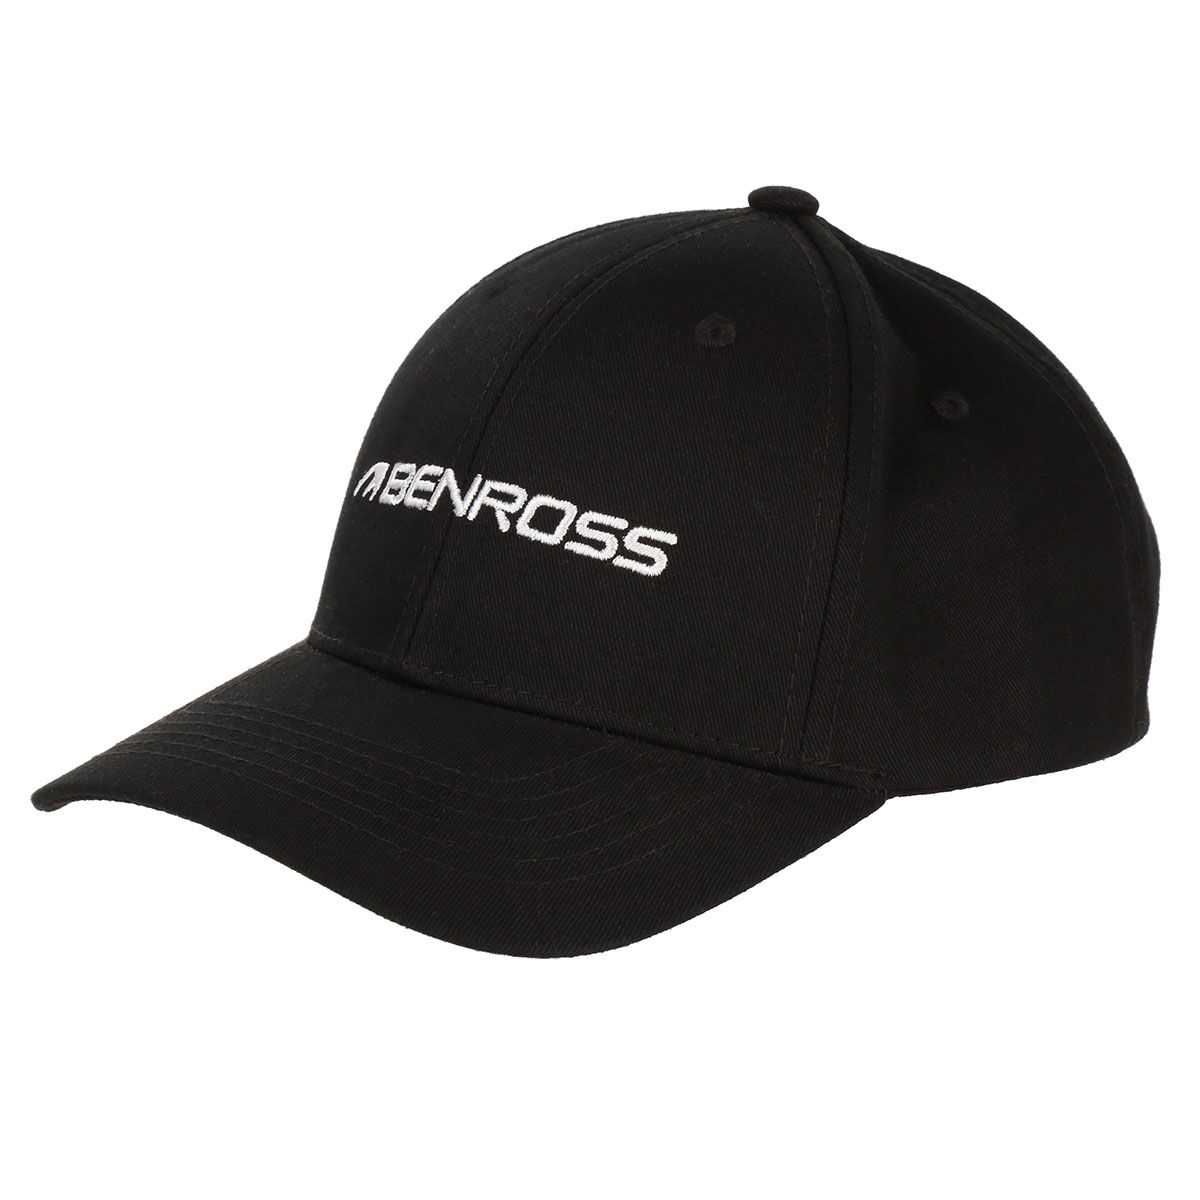 Benross Black and White Embroidered Men’s Core Logo Golf Cap | American Golf, One Size